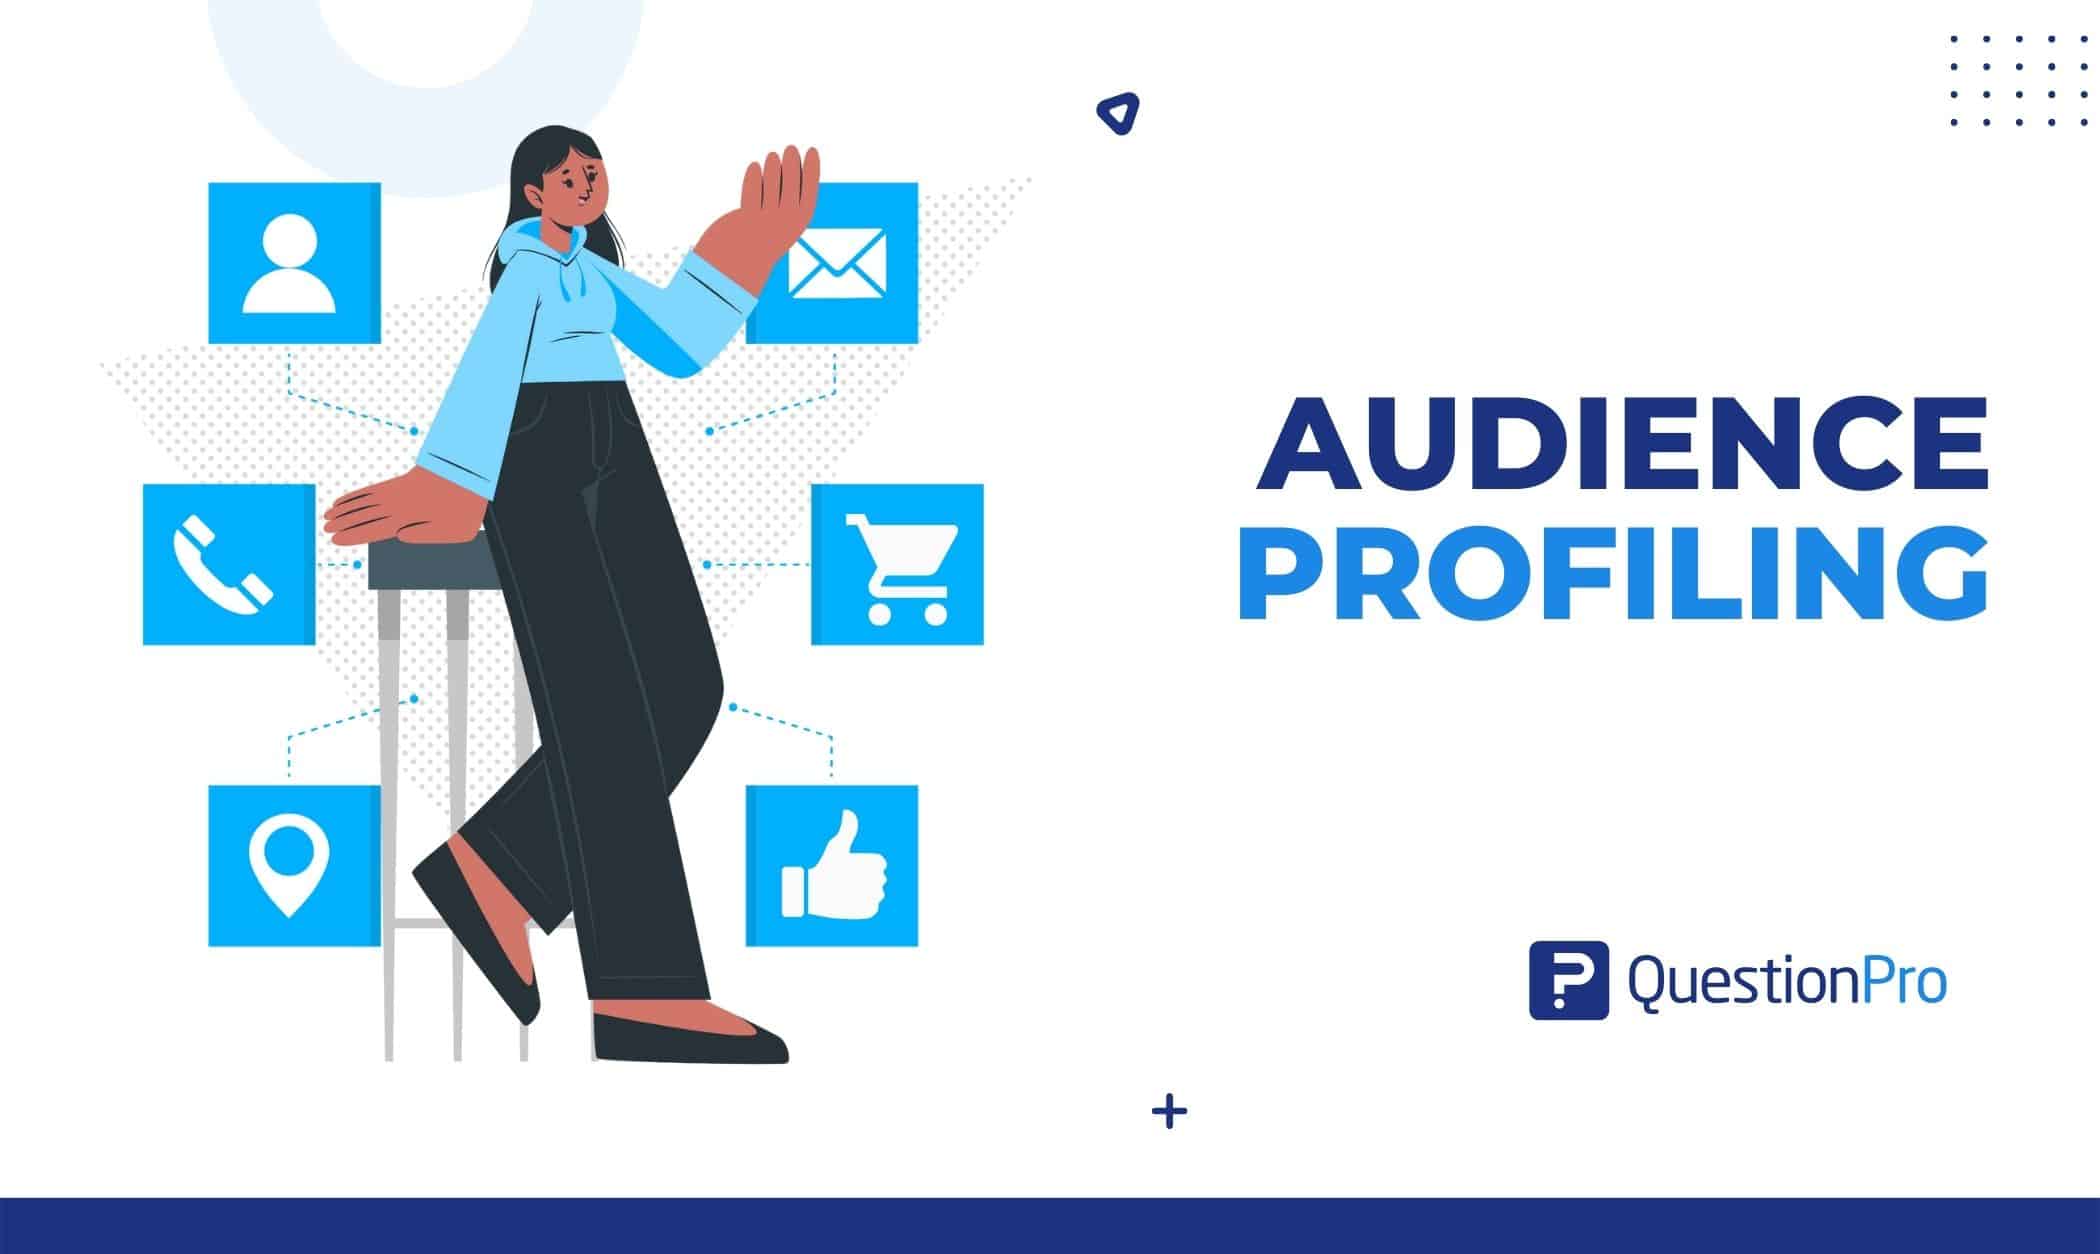 Audience profiling is the technique of segmenting clients by behavior. The goal is to know the audience to boost results. Learn more.